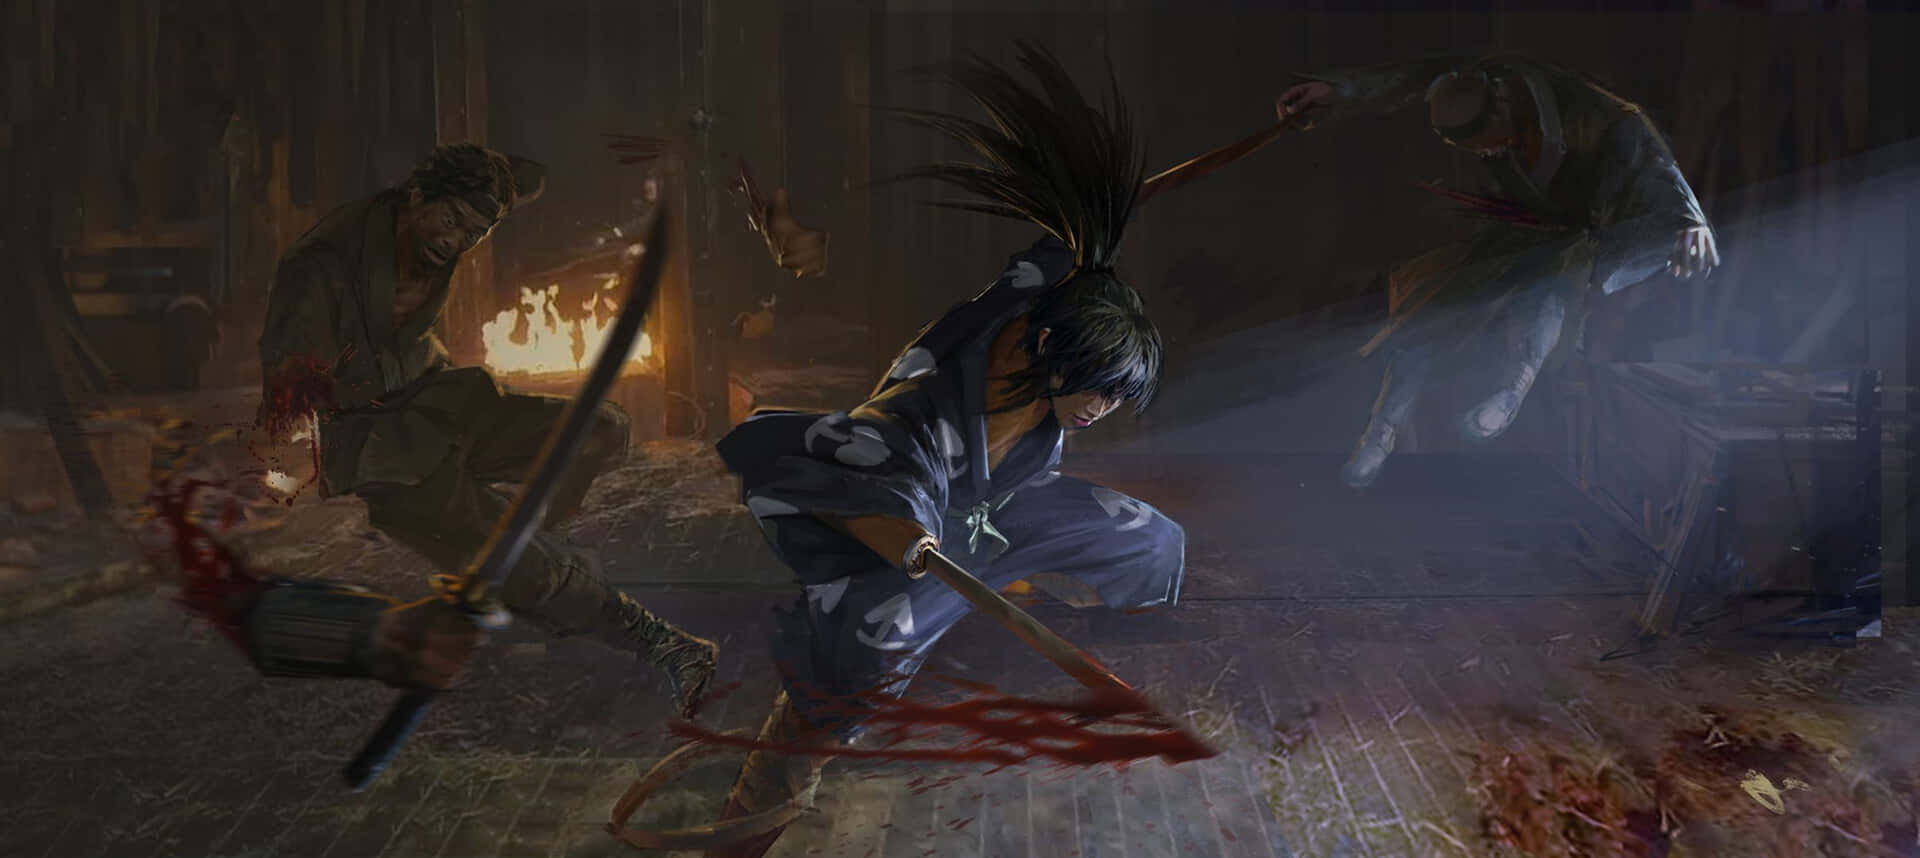 A glimpse into the mystical world of Dororo as Hyakkimaru embarks on a mission to reclaim his body pieces.